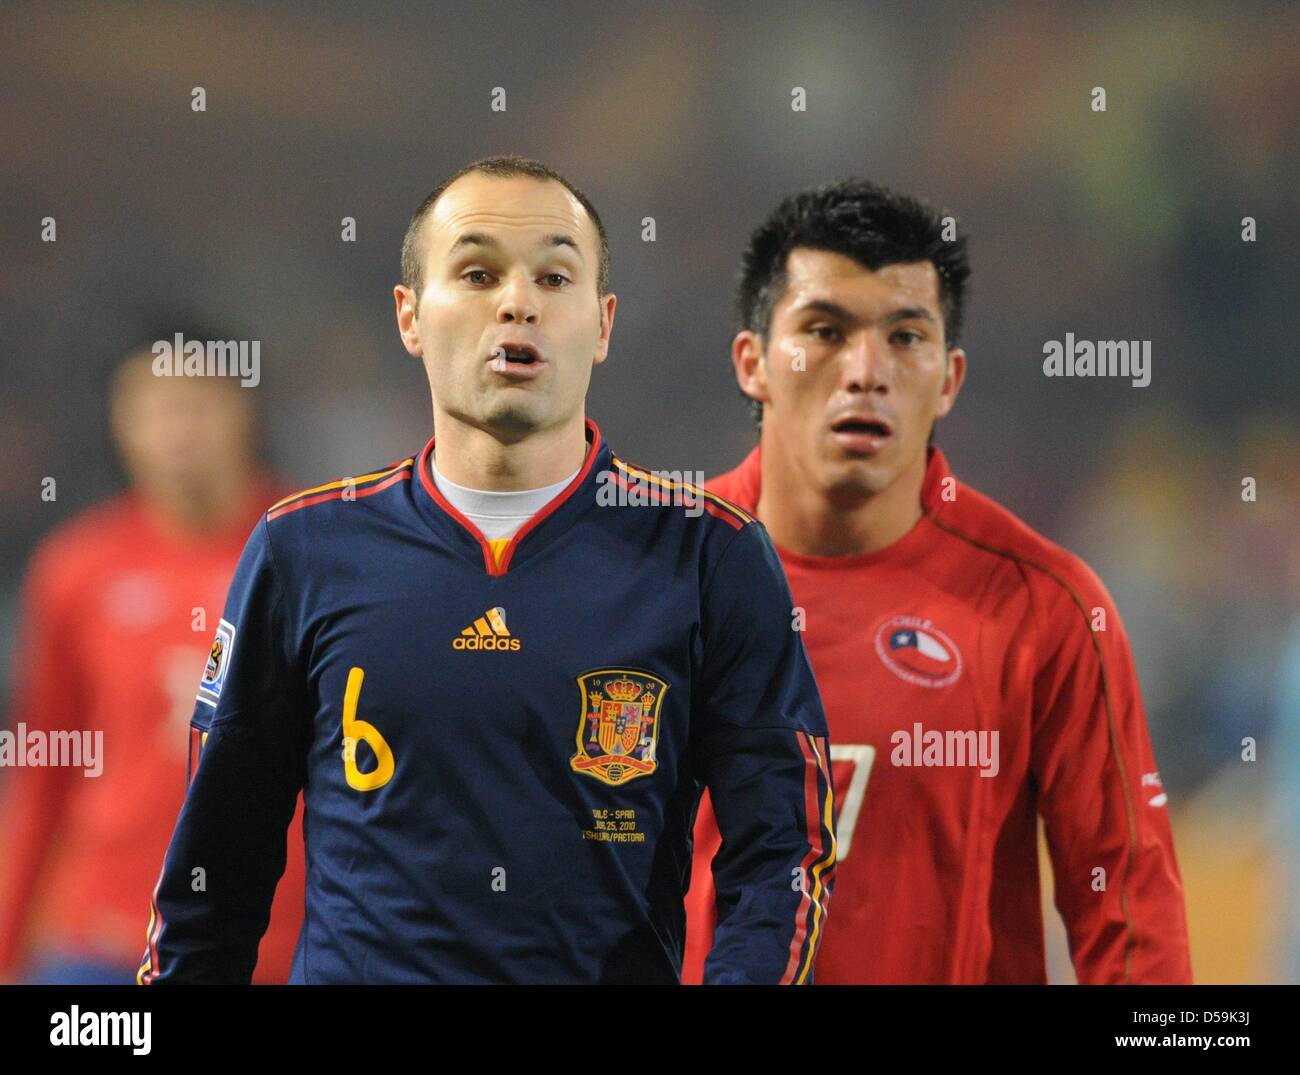 Spain's Andres Iniesta (L) stands next to Chile's Gary Medel during the 2010 FIFA World Cup group H match between Chile and Spain at Loftus Versfeld Stadium in Pretoria, South Africa 25 June 2010. Photo: Marcus Brandt dpa - Please refer to http://dpaq.de/FIFA-WM2010-TC Stock Photo